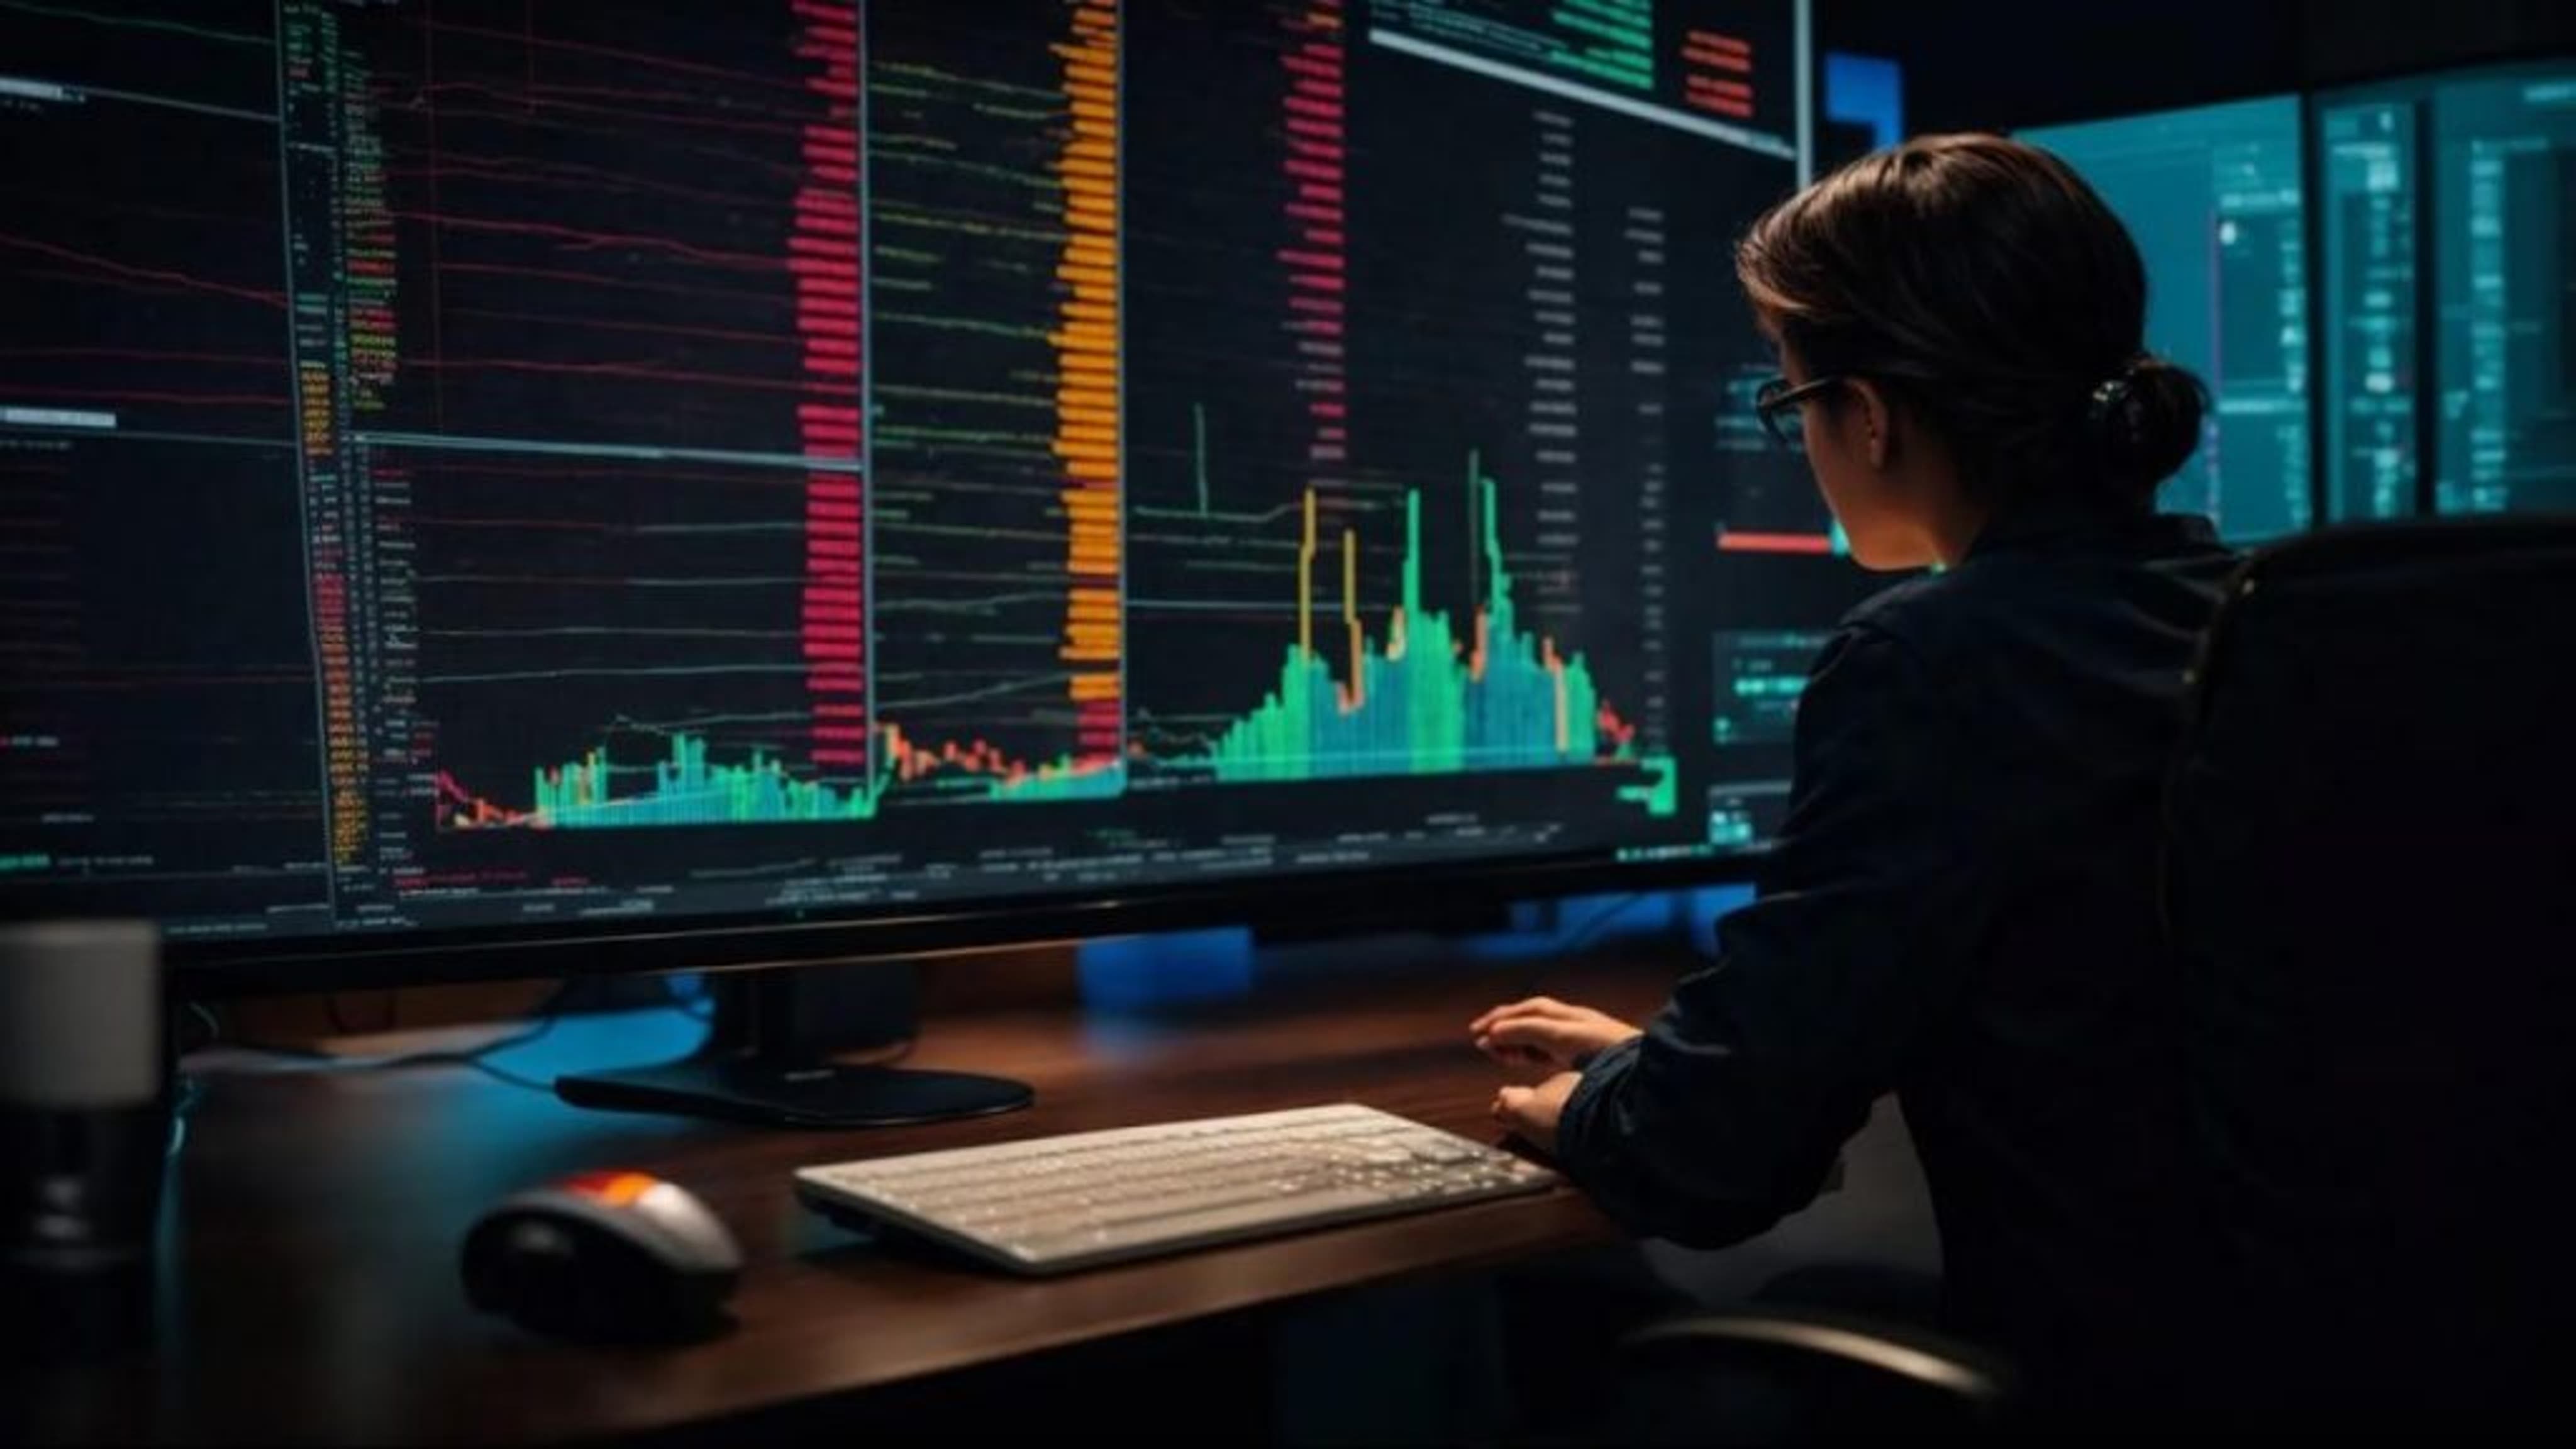 How to trade futures on Interactive Brokers